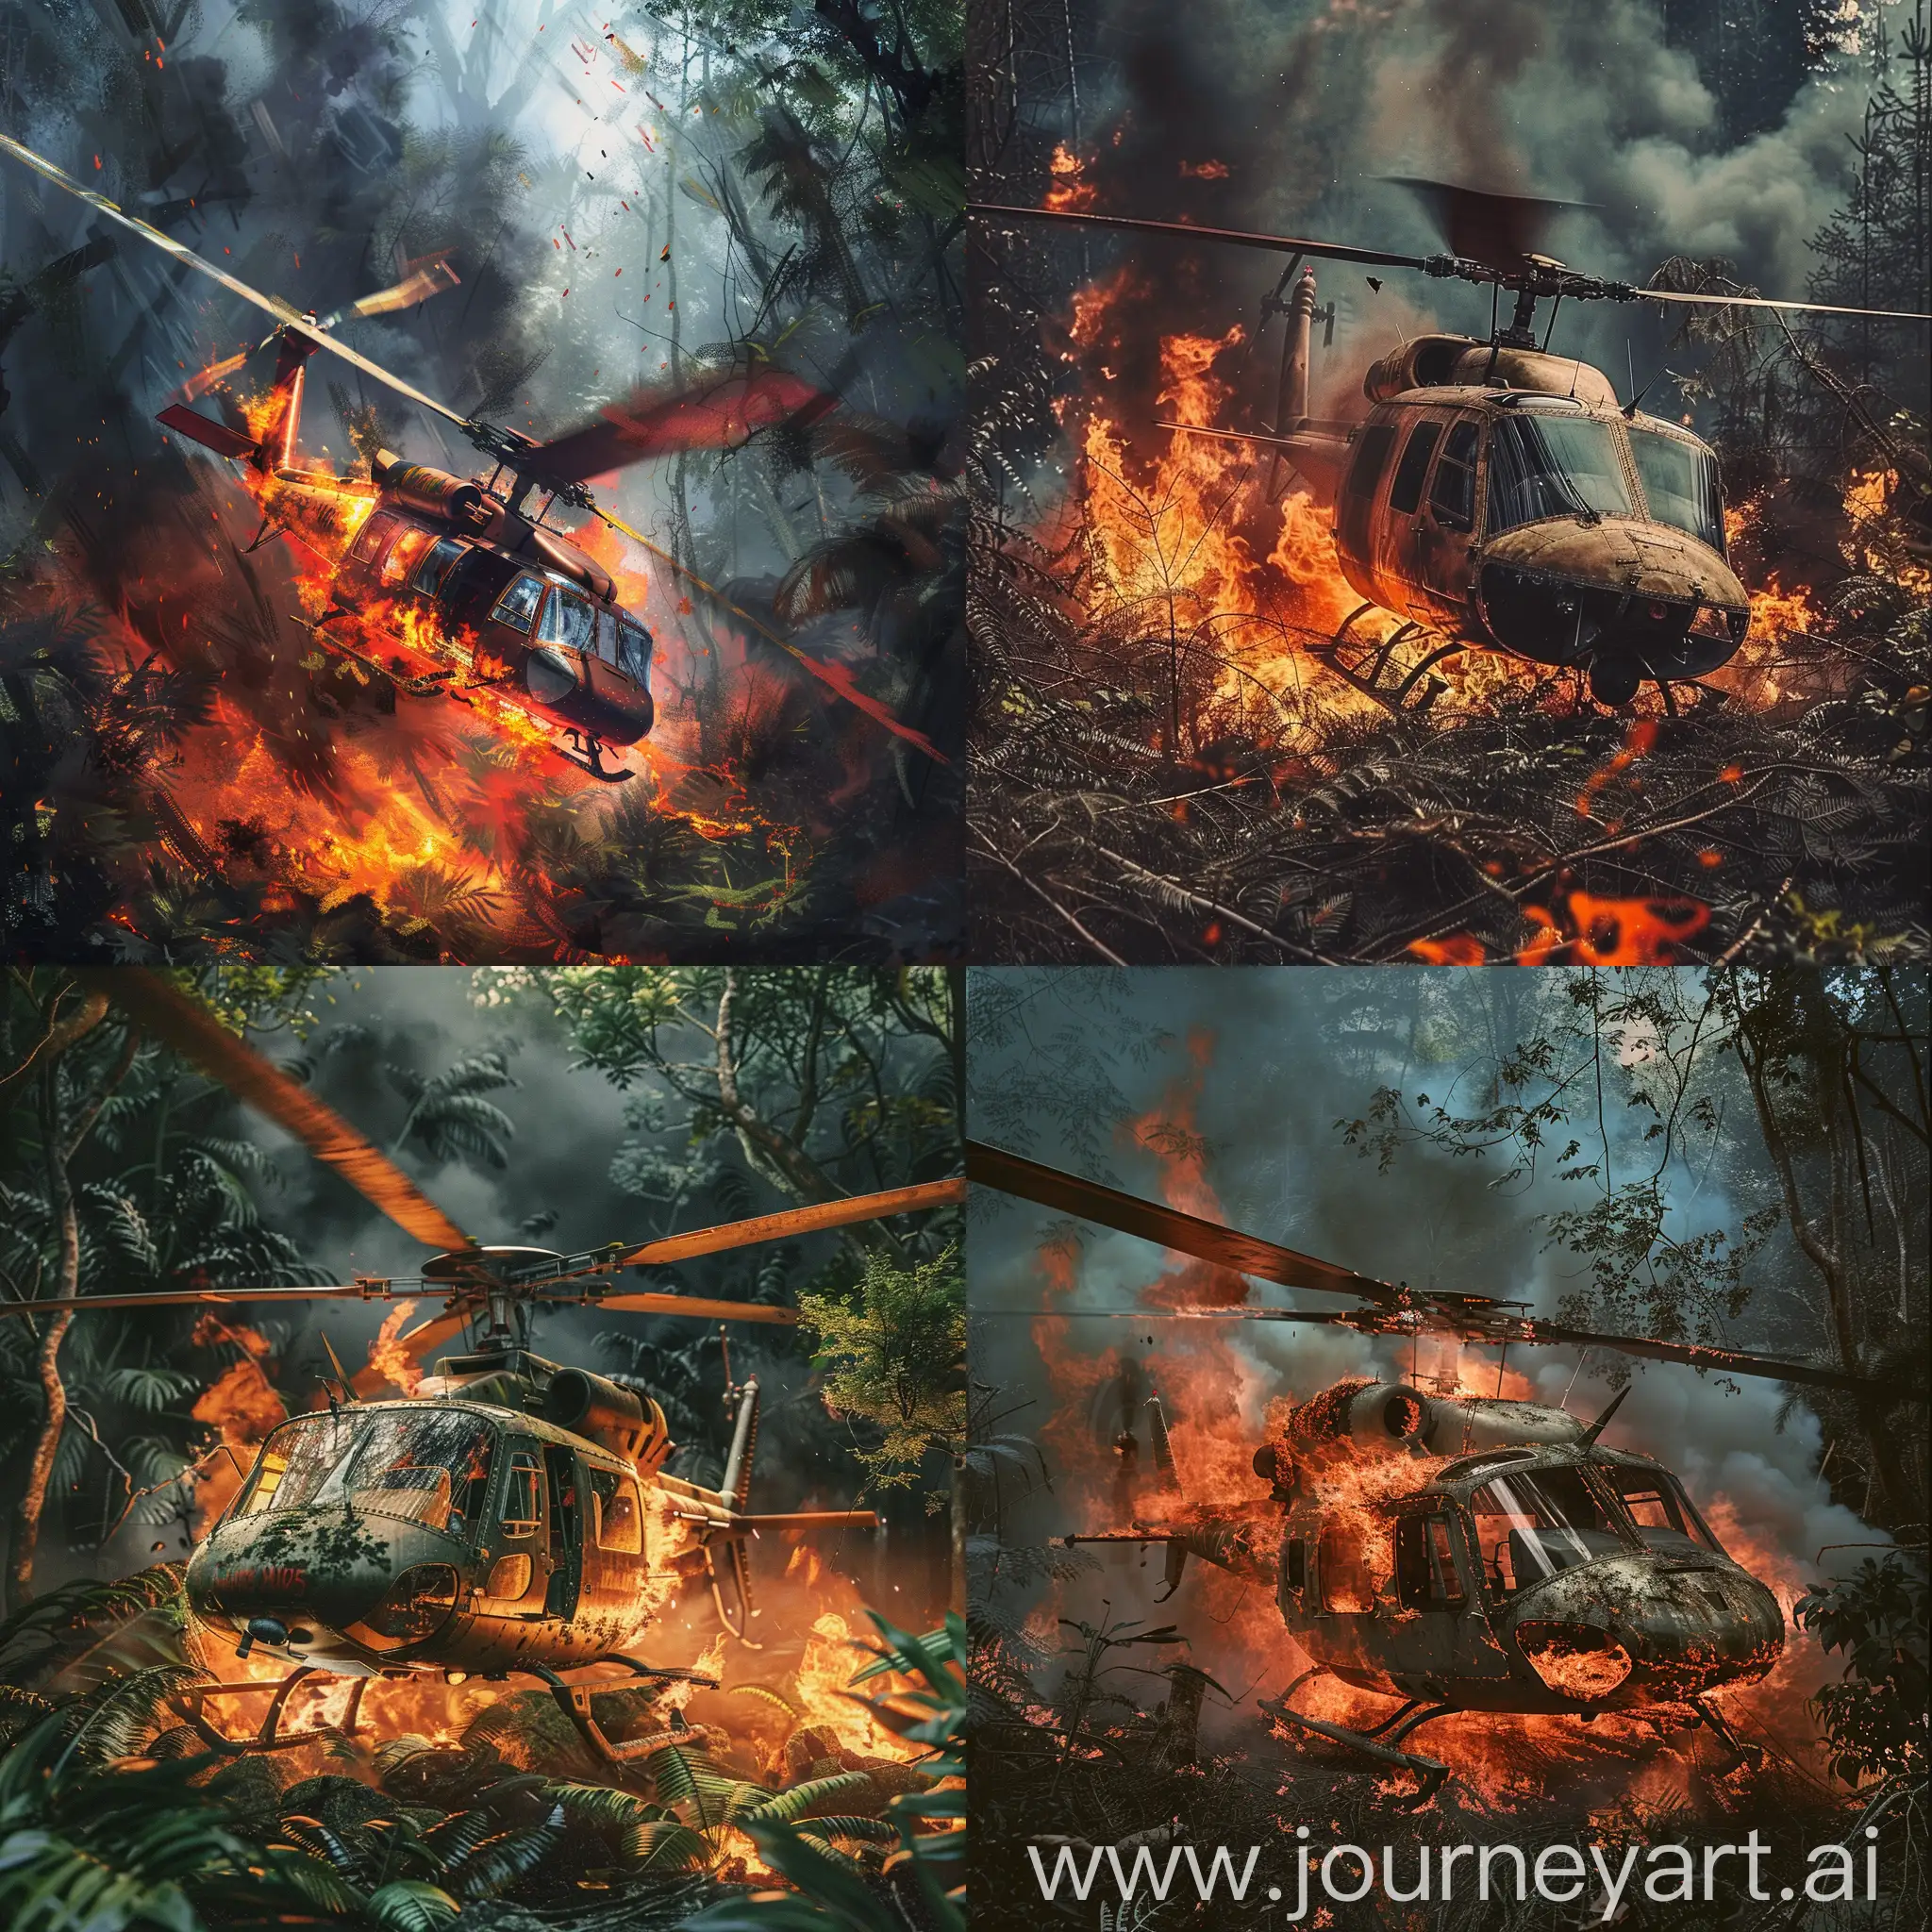 Burning-Helicopter-Crash-in-Forest-with-Sheikh-Talaba